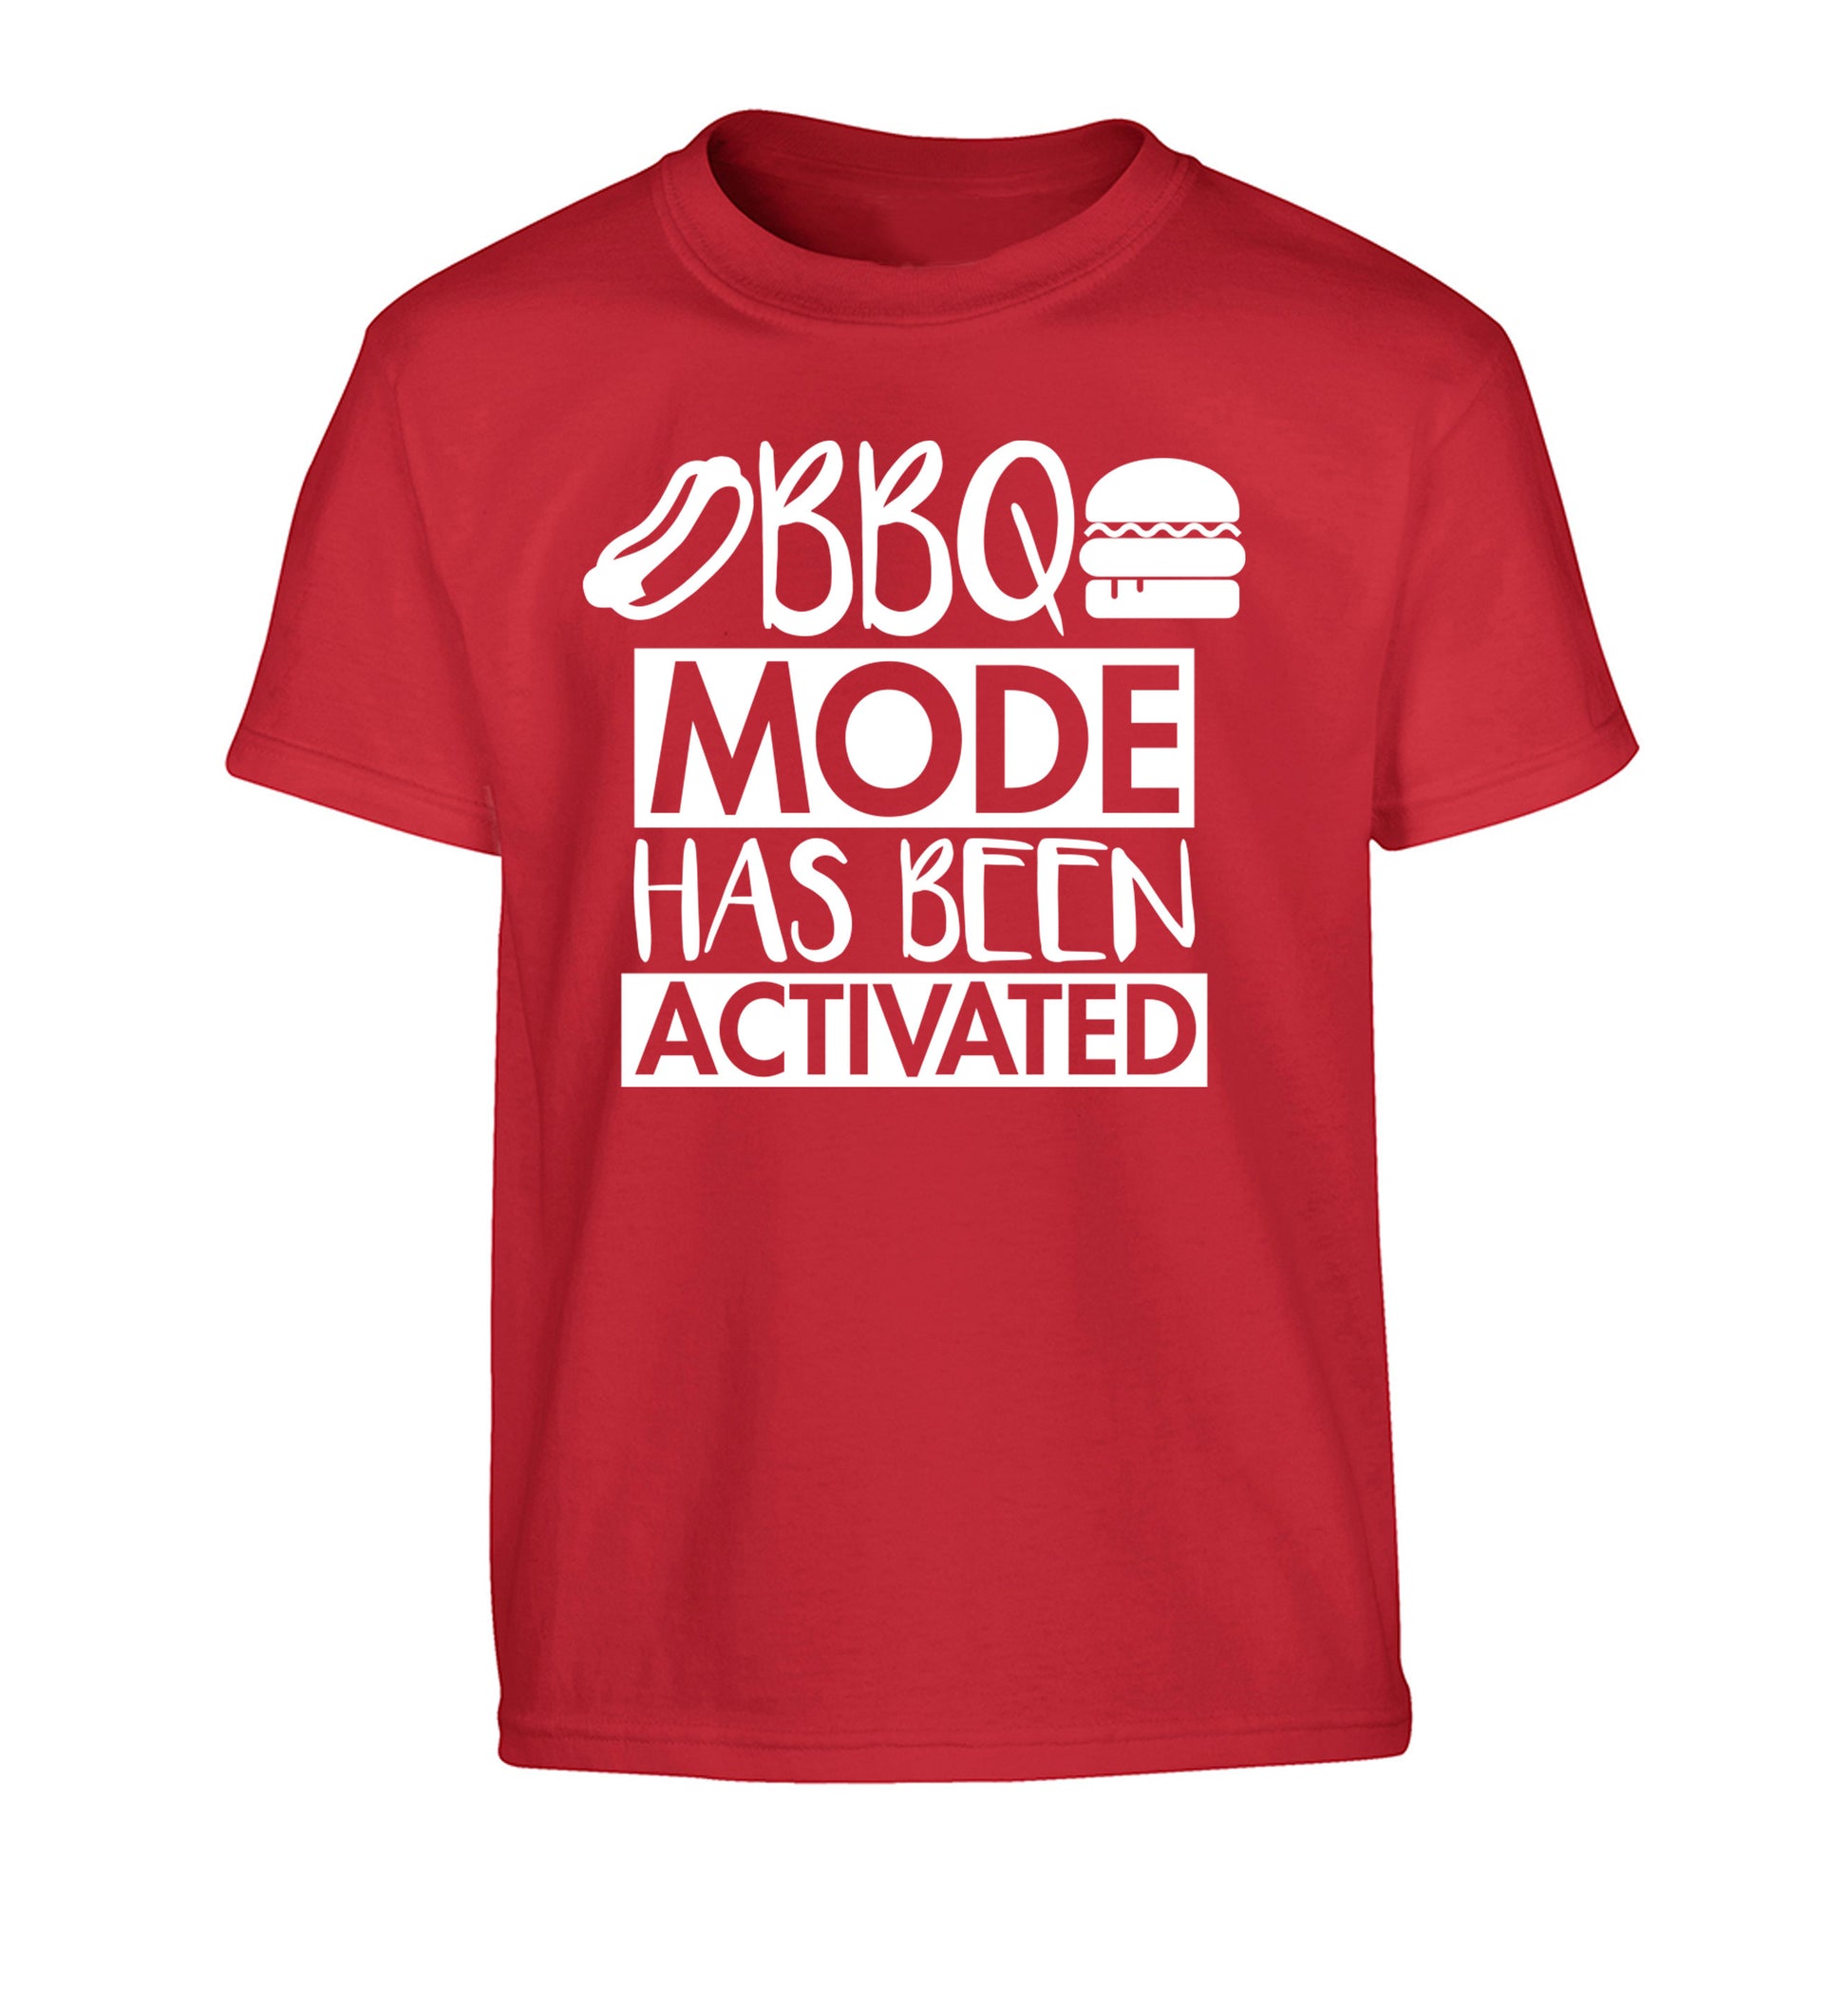 Bbq mode has been activated Children's red Tshirt 12-14 Years